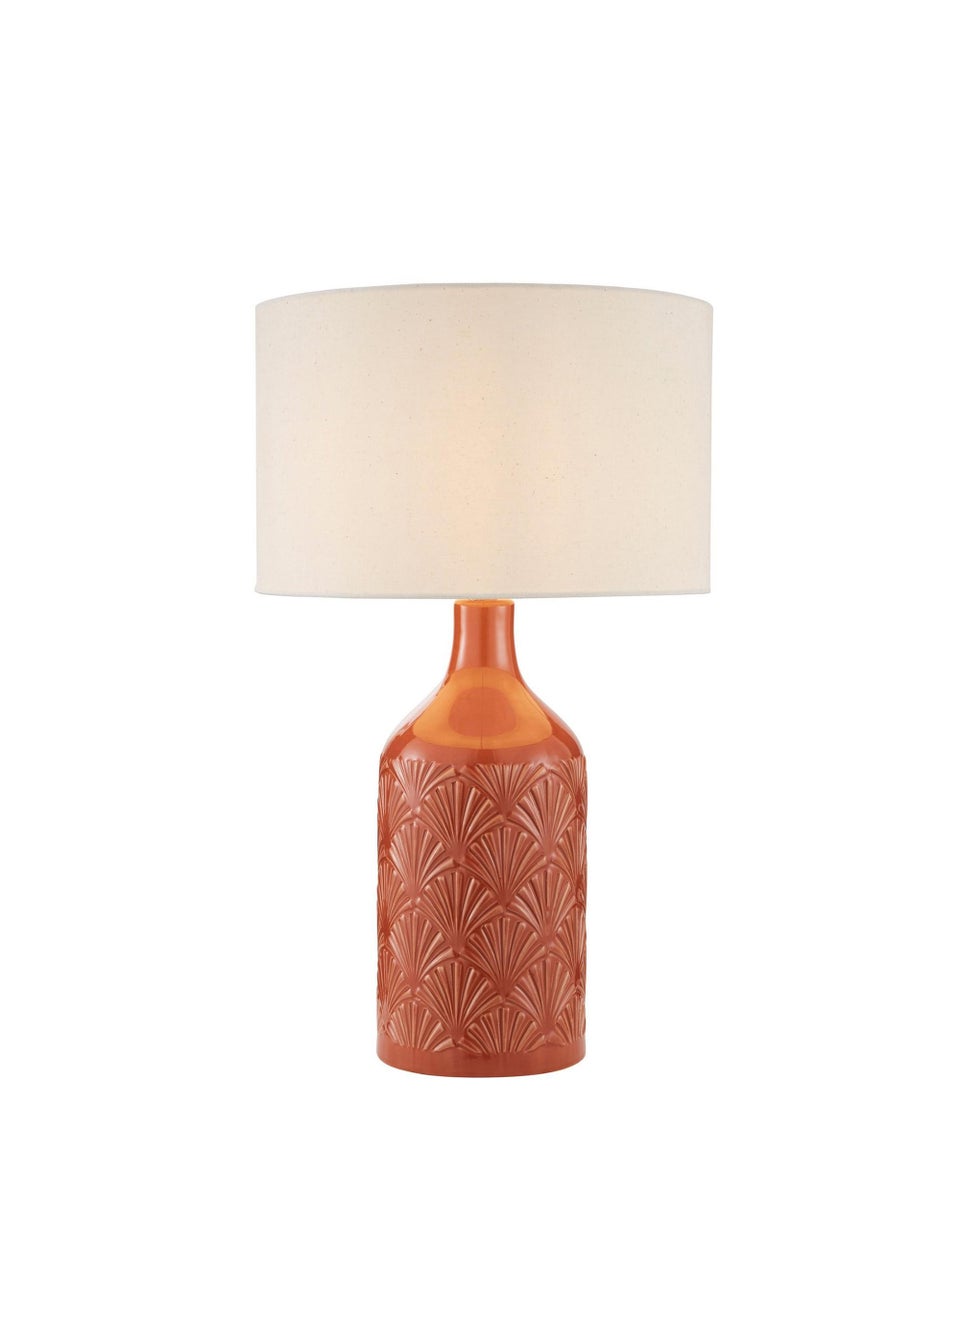 BHS Lucy Ceramic Terracotta Table Lamp